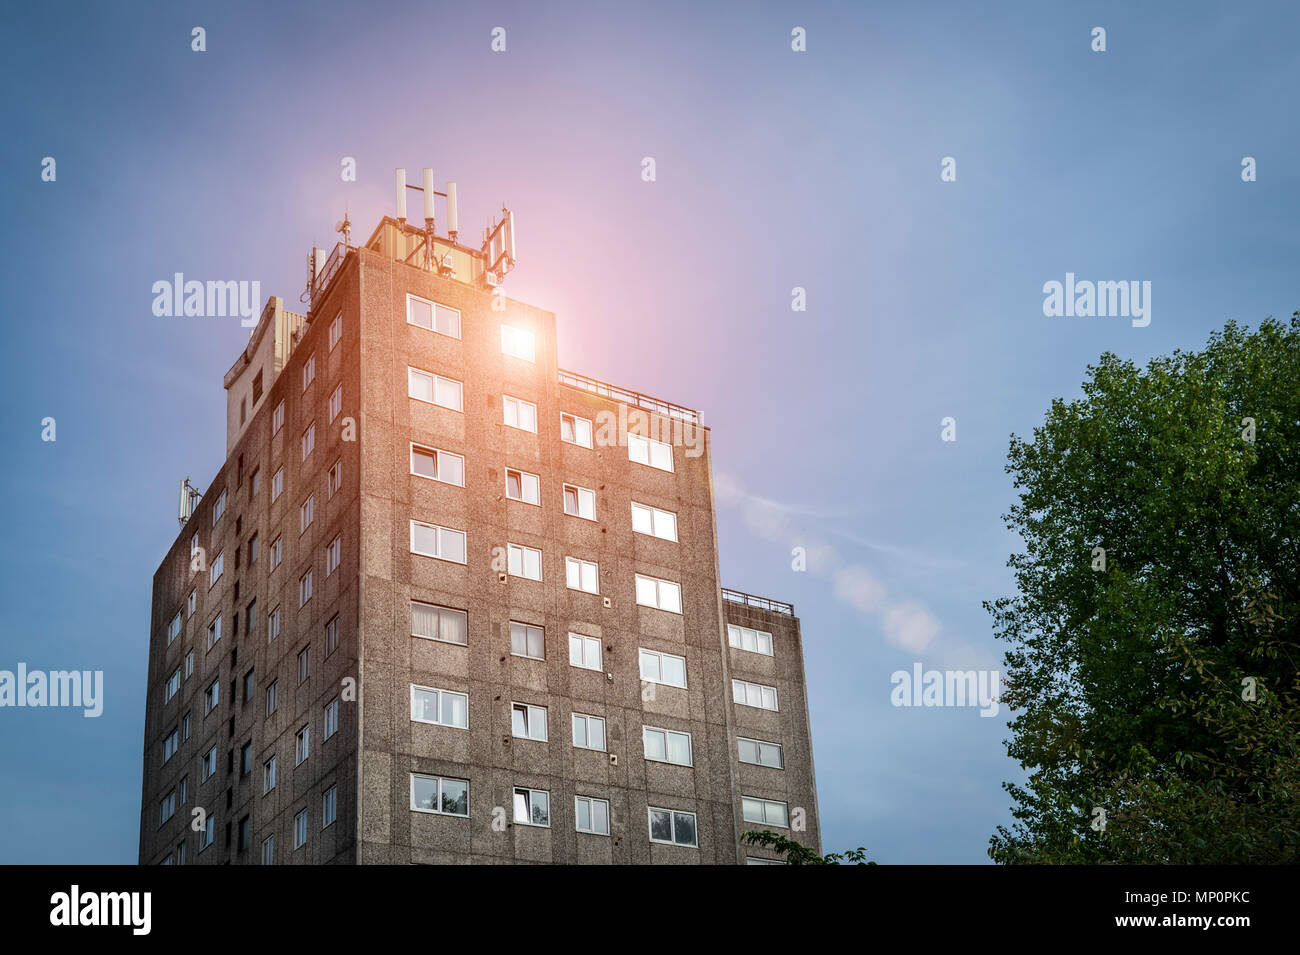 concrete tower block of residential flats and apartments. Stock Photo